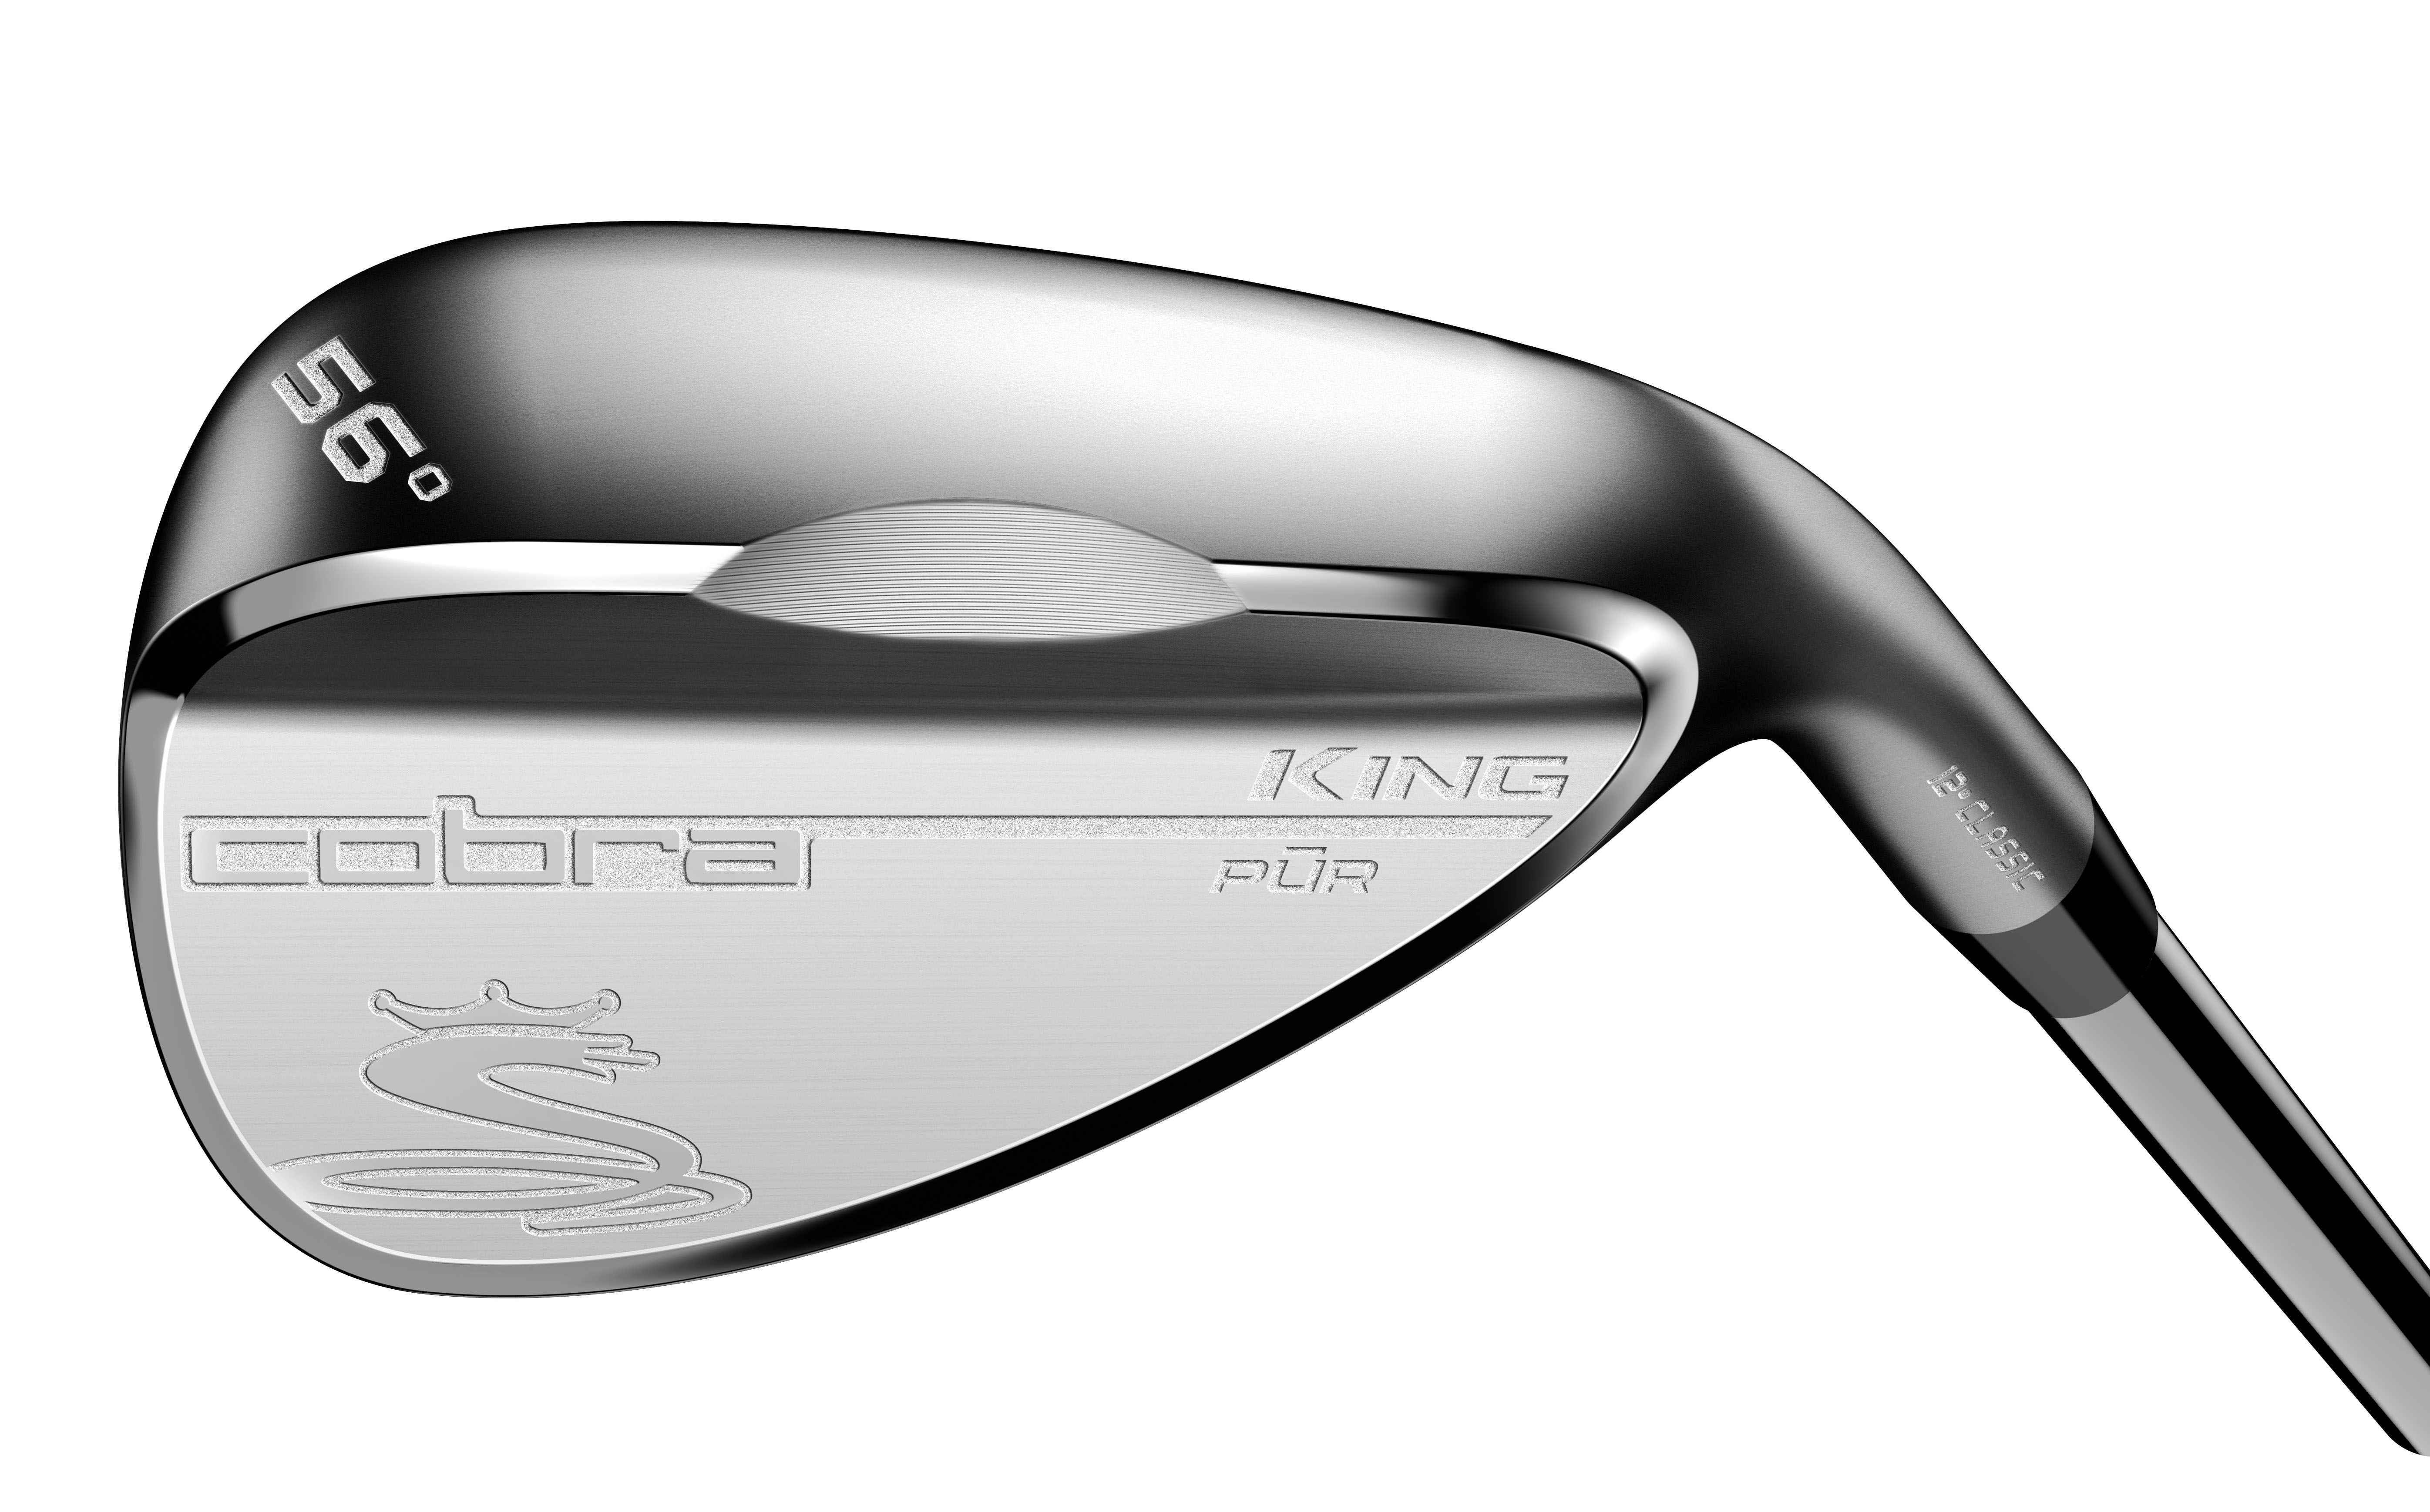 King PUR wedges from Cobra use un-chromed raw finish to uncomplicate spin feel | This is the Loop | Golf Digest